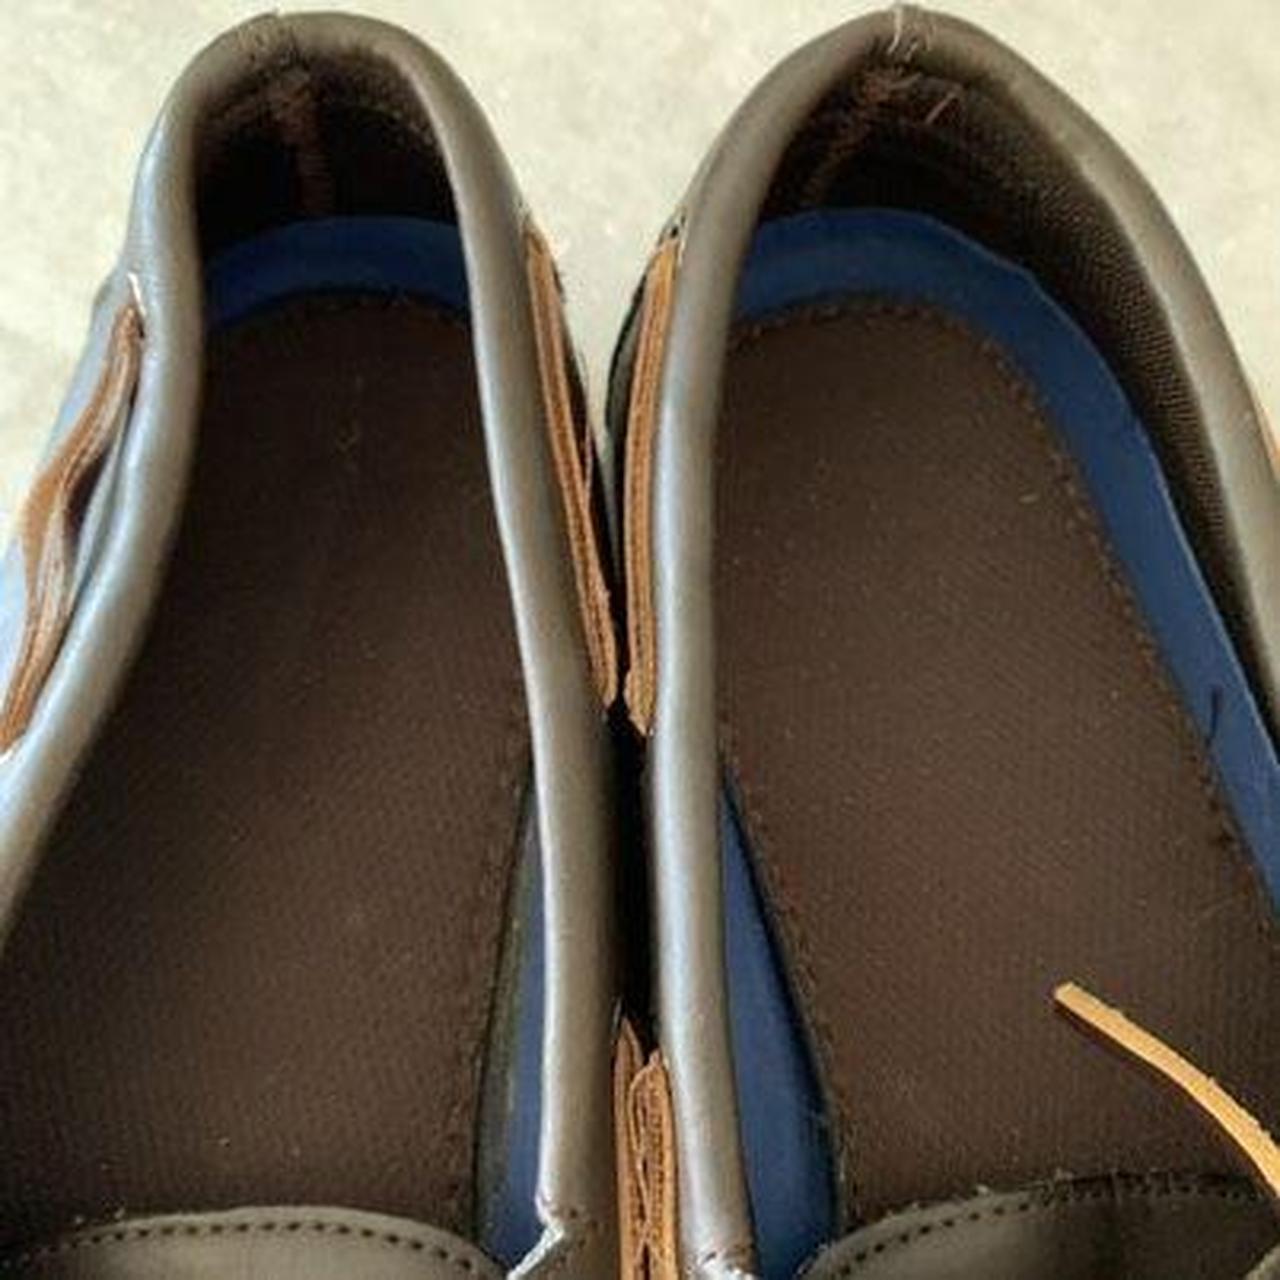 Thom McAn Land Rover Brown Sueded Loafers - Size 9